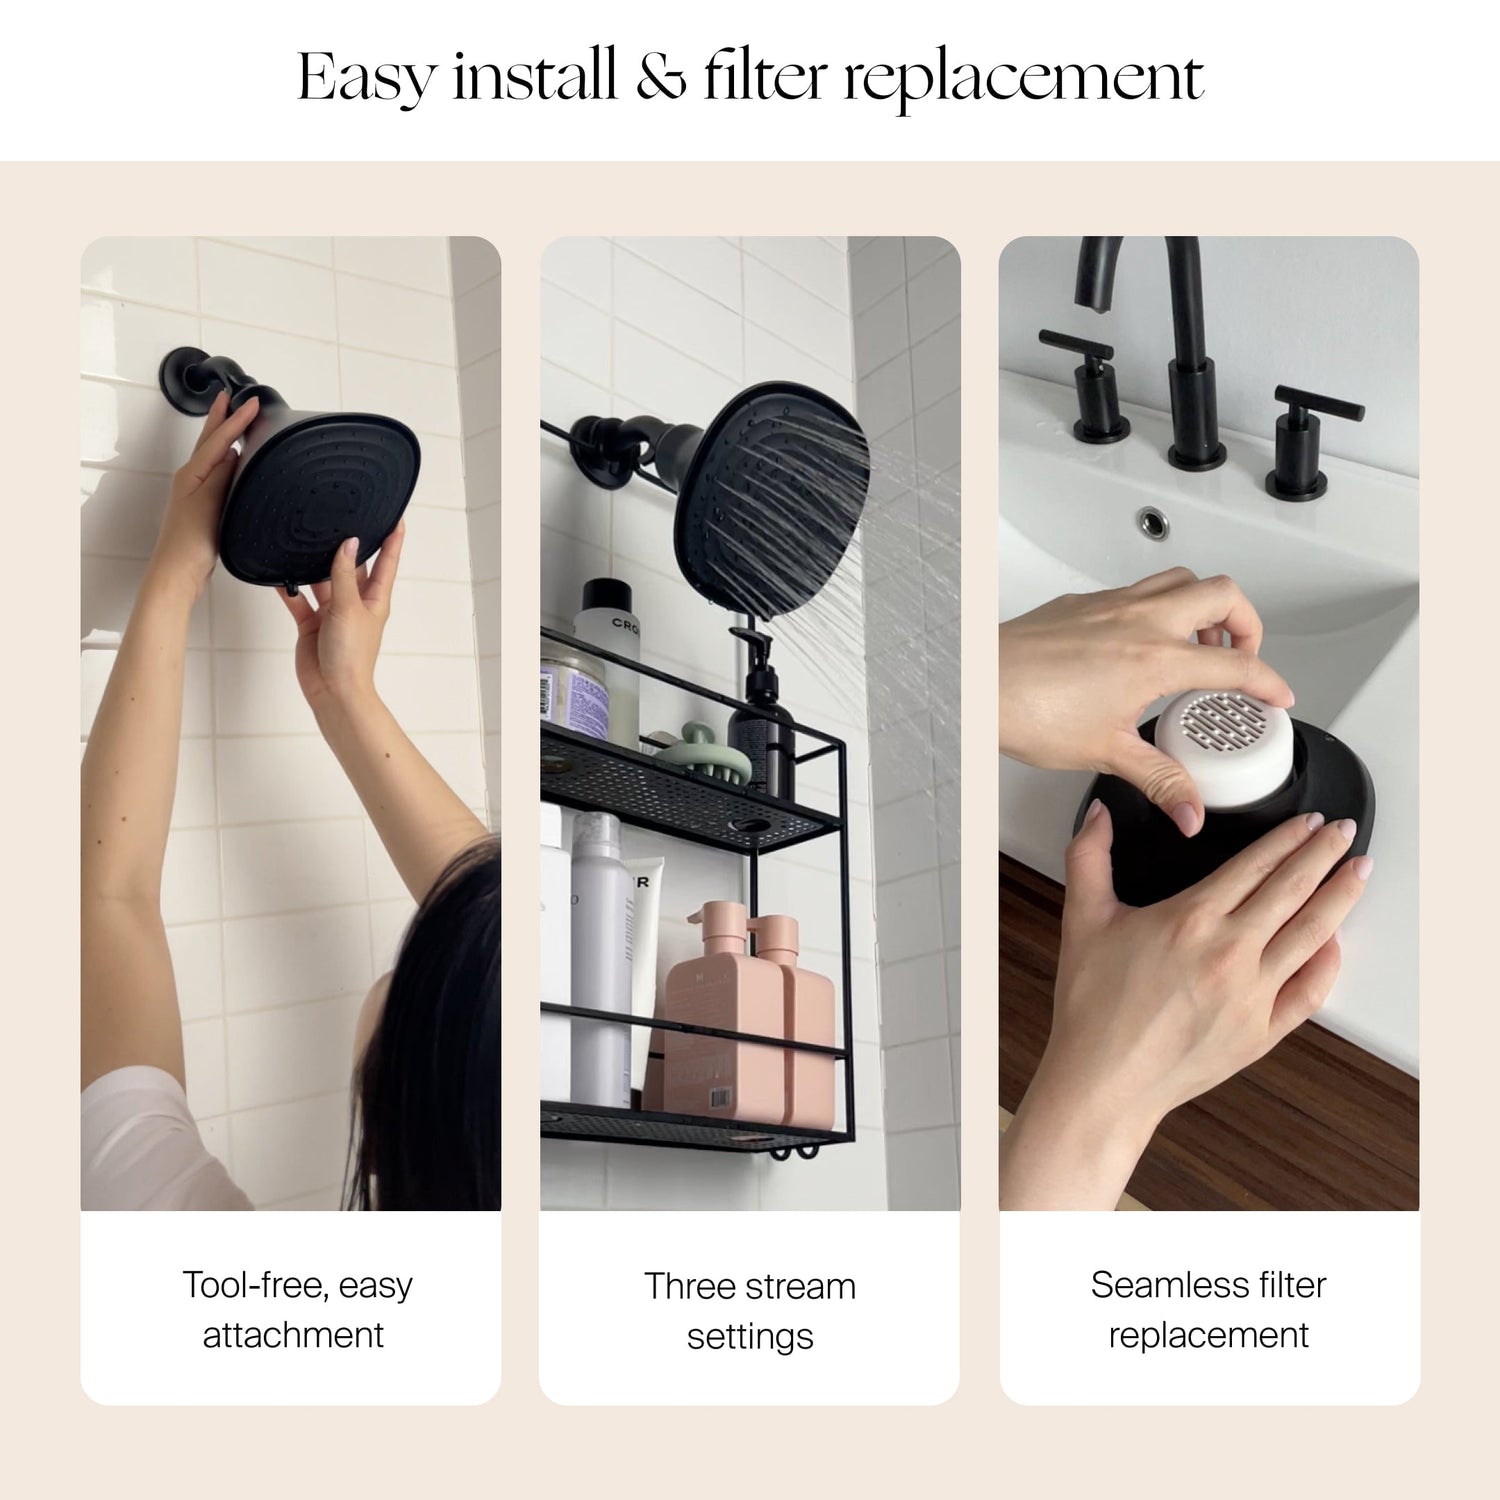 Filtered Showerhead Bundle | Lifestyle, Easy install & filter replacement